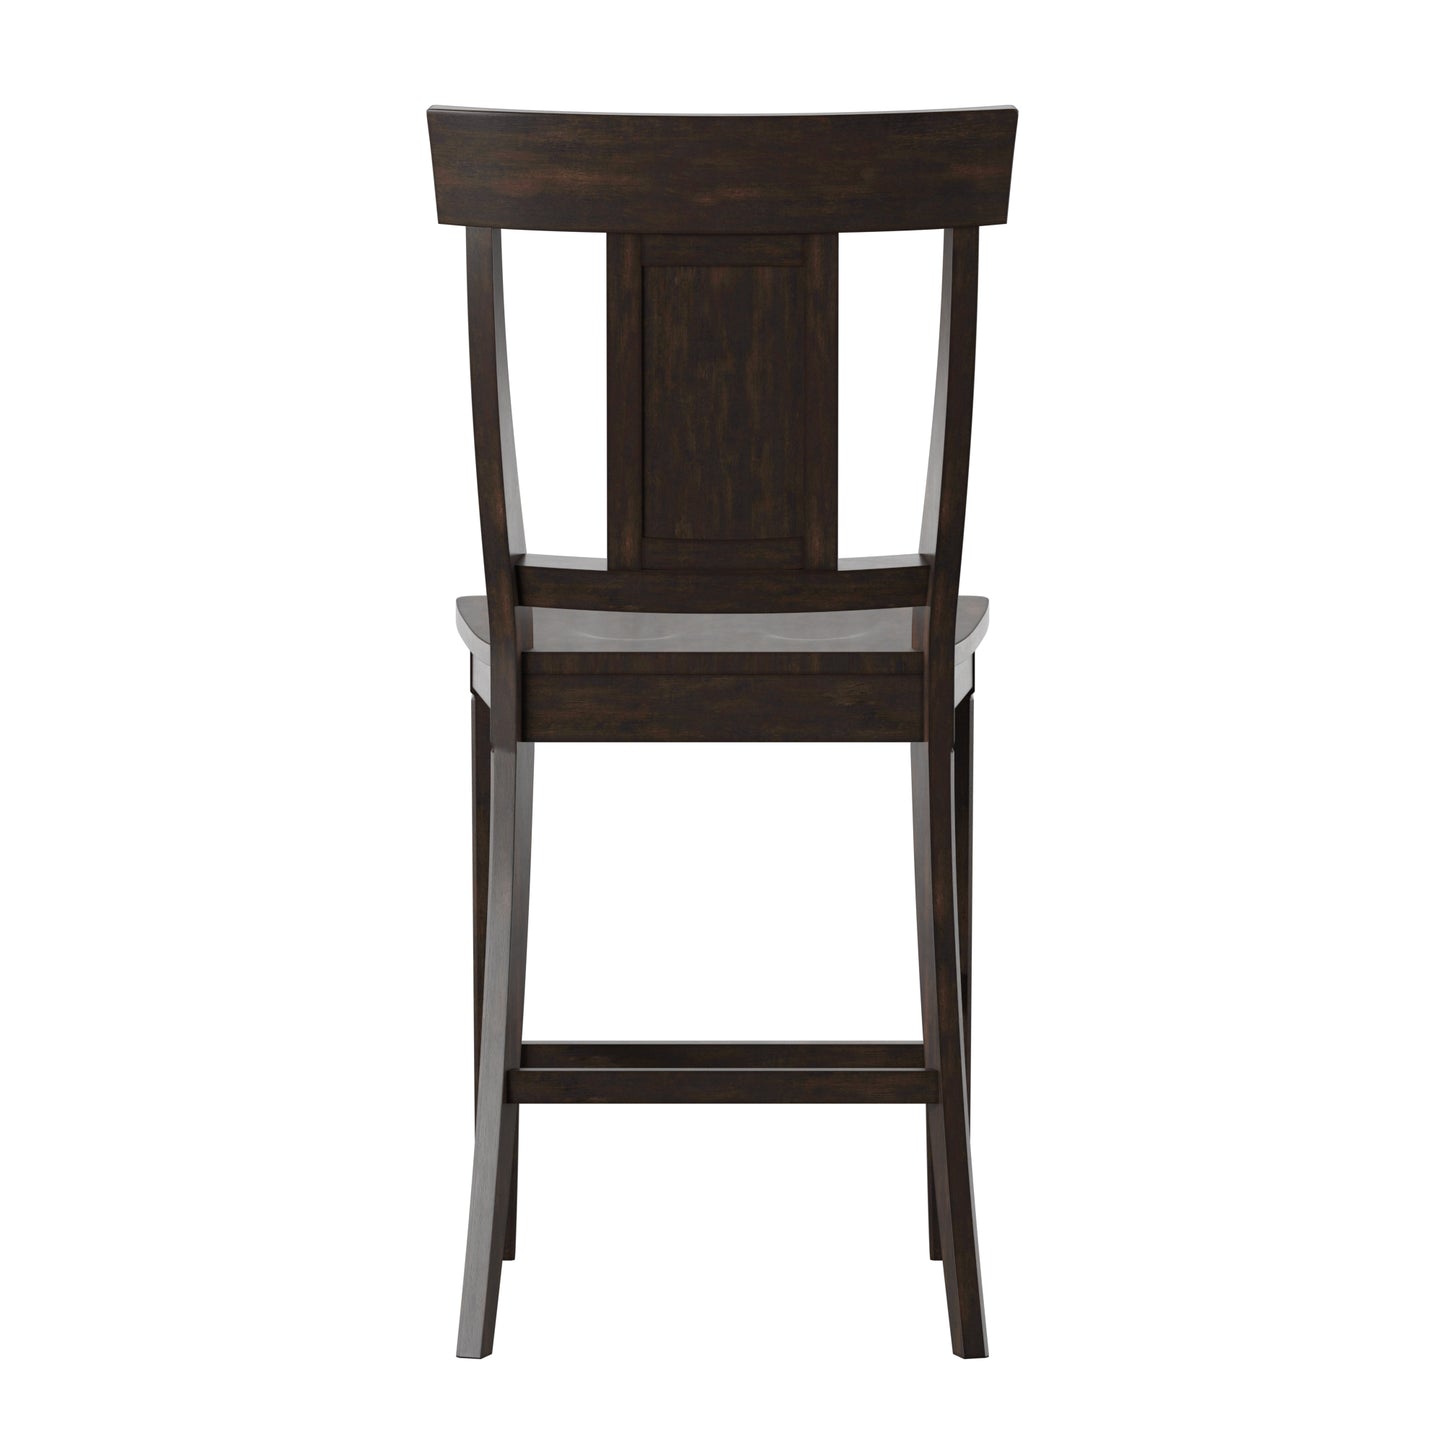 Panel Back Wood Counter Height Chairs (Set of 2) - Antique Black